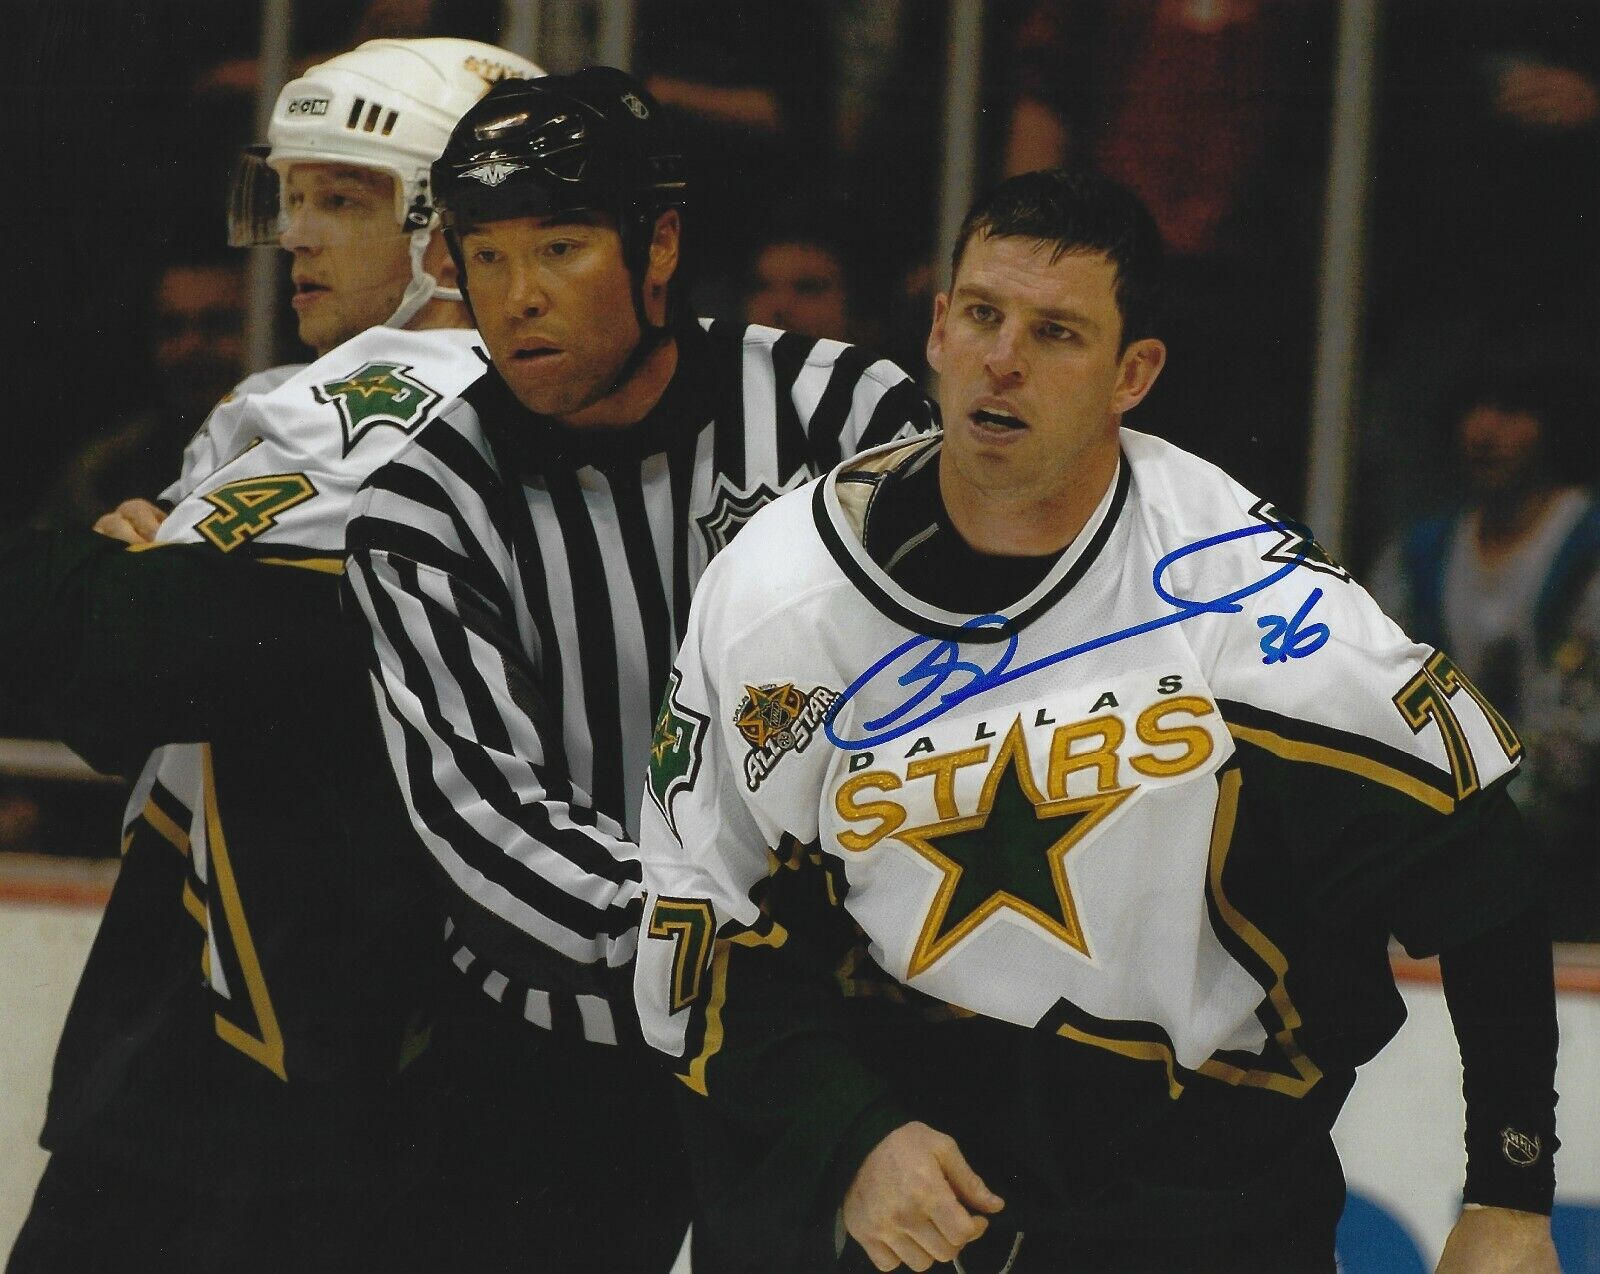 Autographed 8x10 MATTHEW BARNABY Dallas Stars Photo Poster painting w/Show Ticket